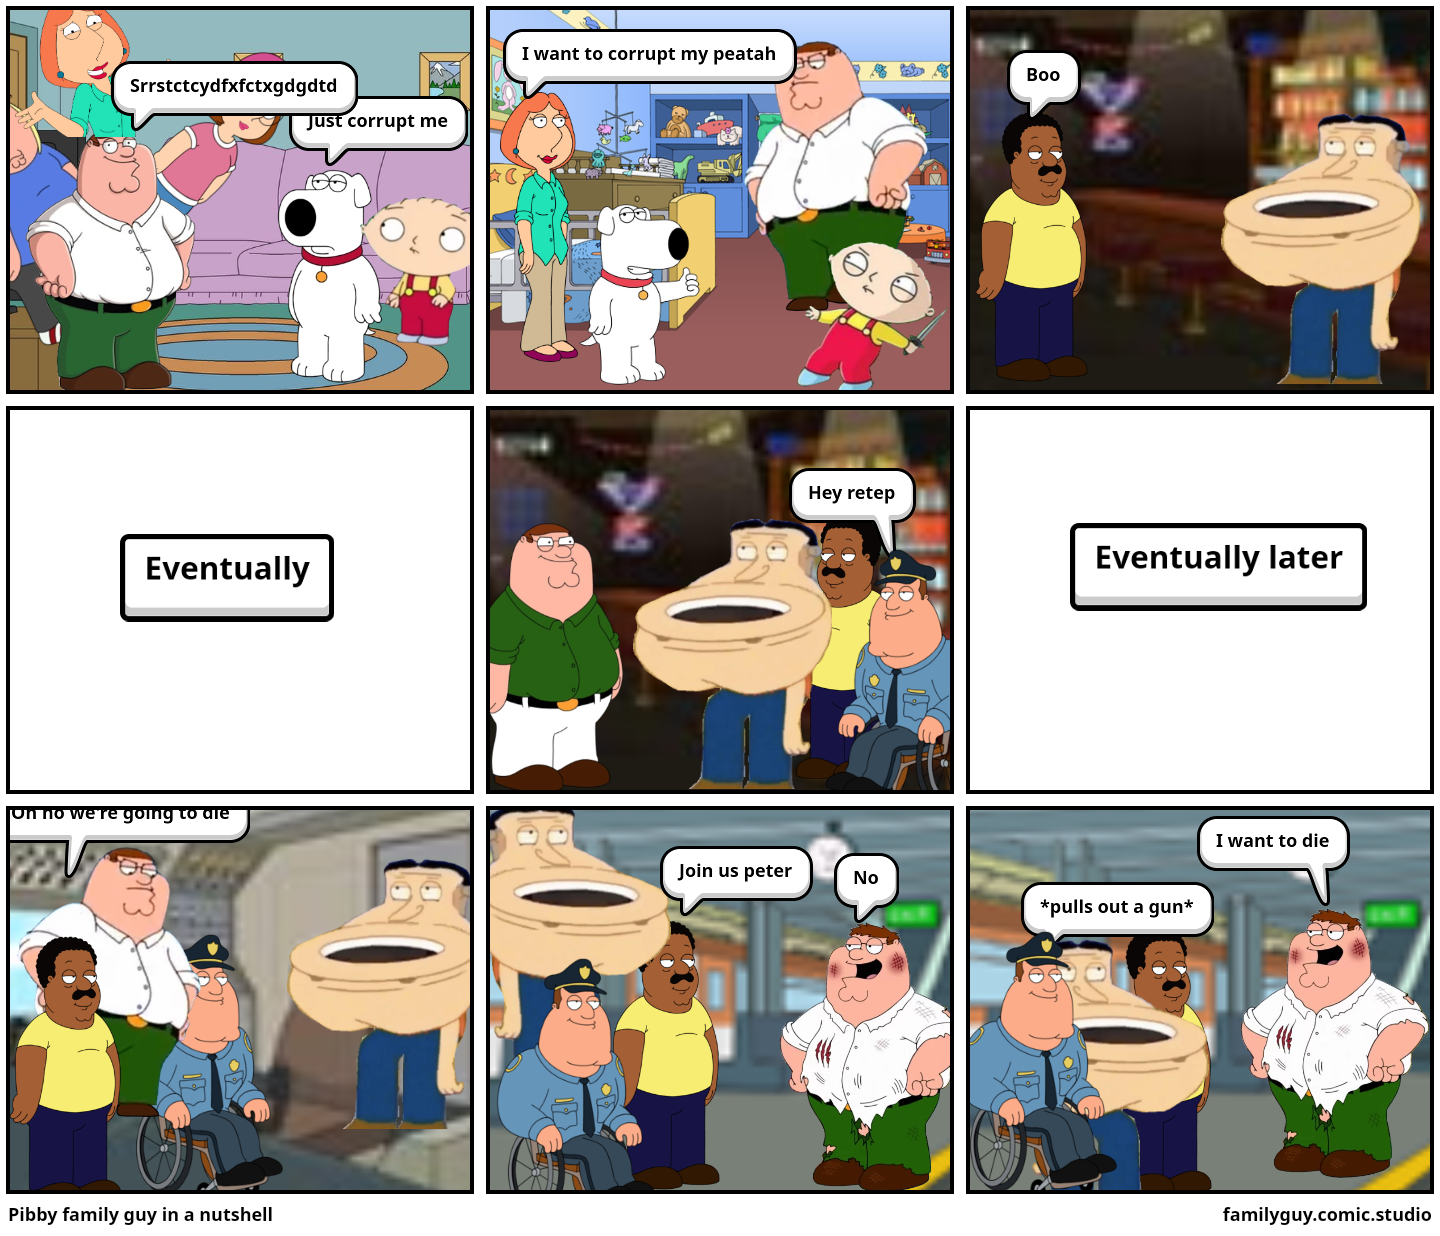 I Animated The Family Guy Pibby Concept For FNF (Fashioned Values) 